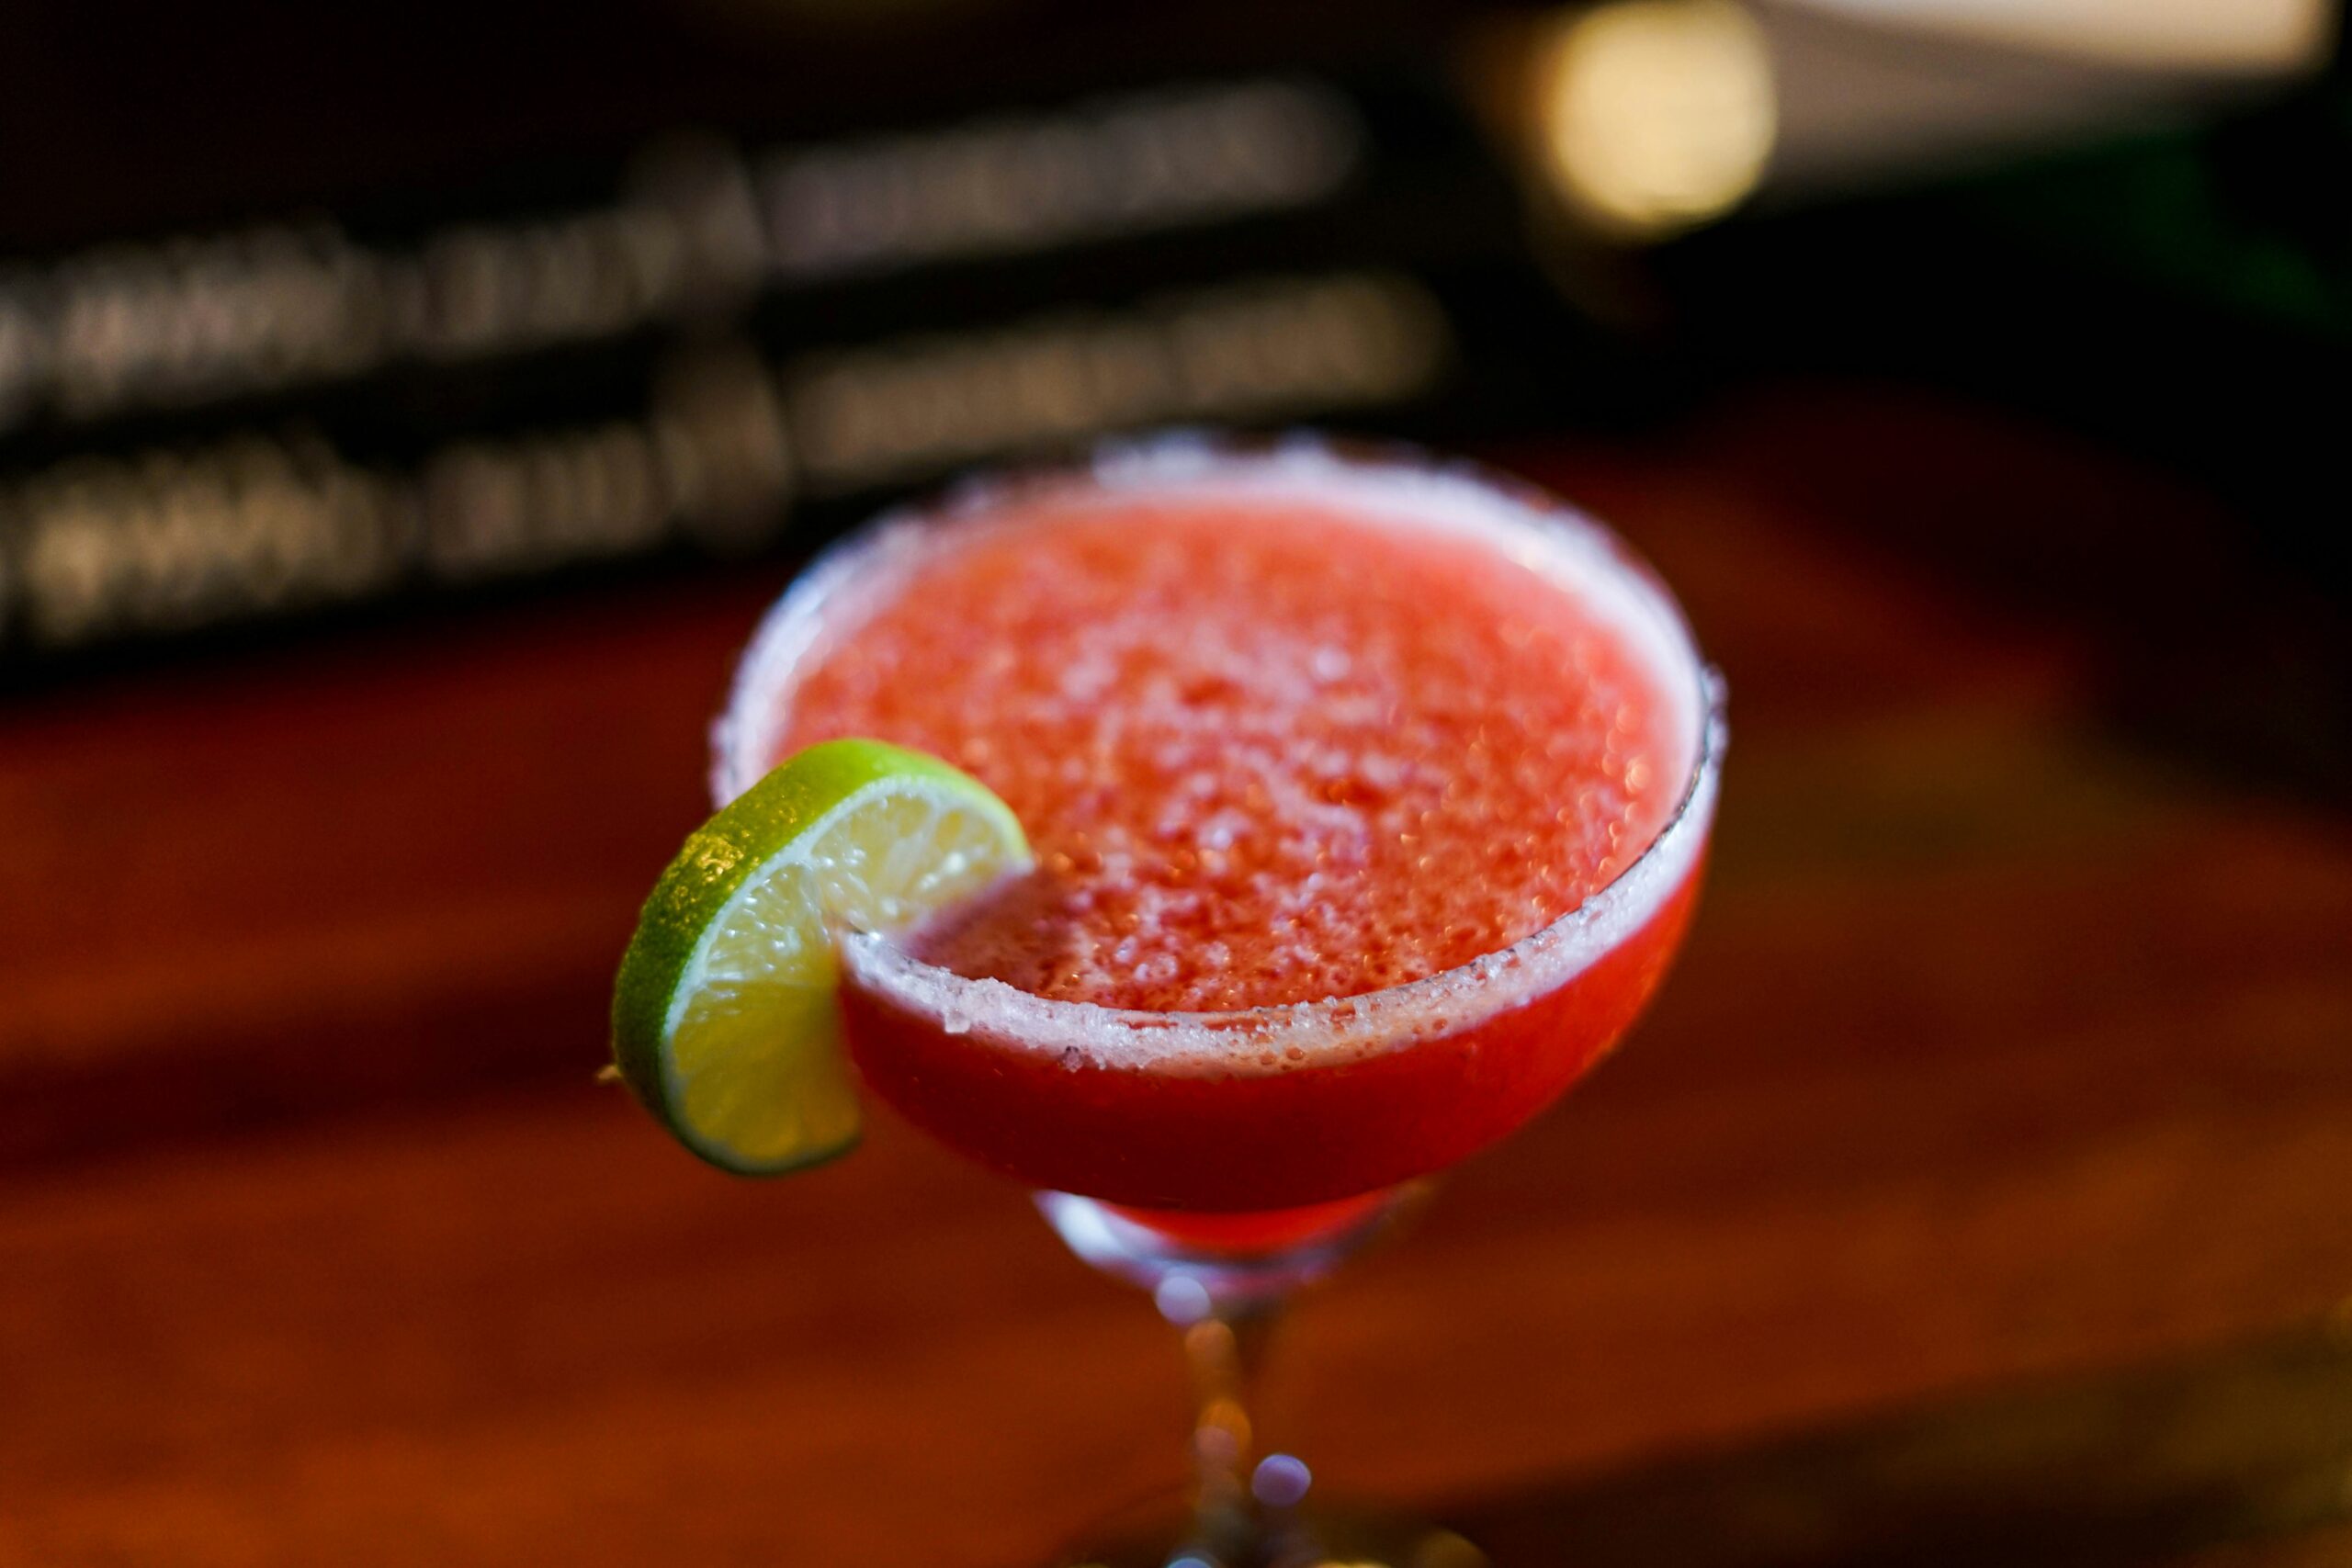 Check out these skinny margarita recipes with different flavors. Pictured: A strawberry margarita